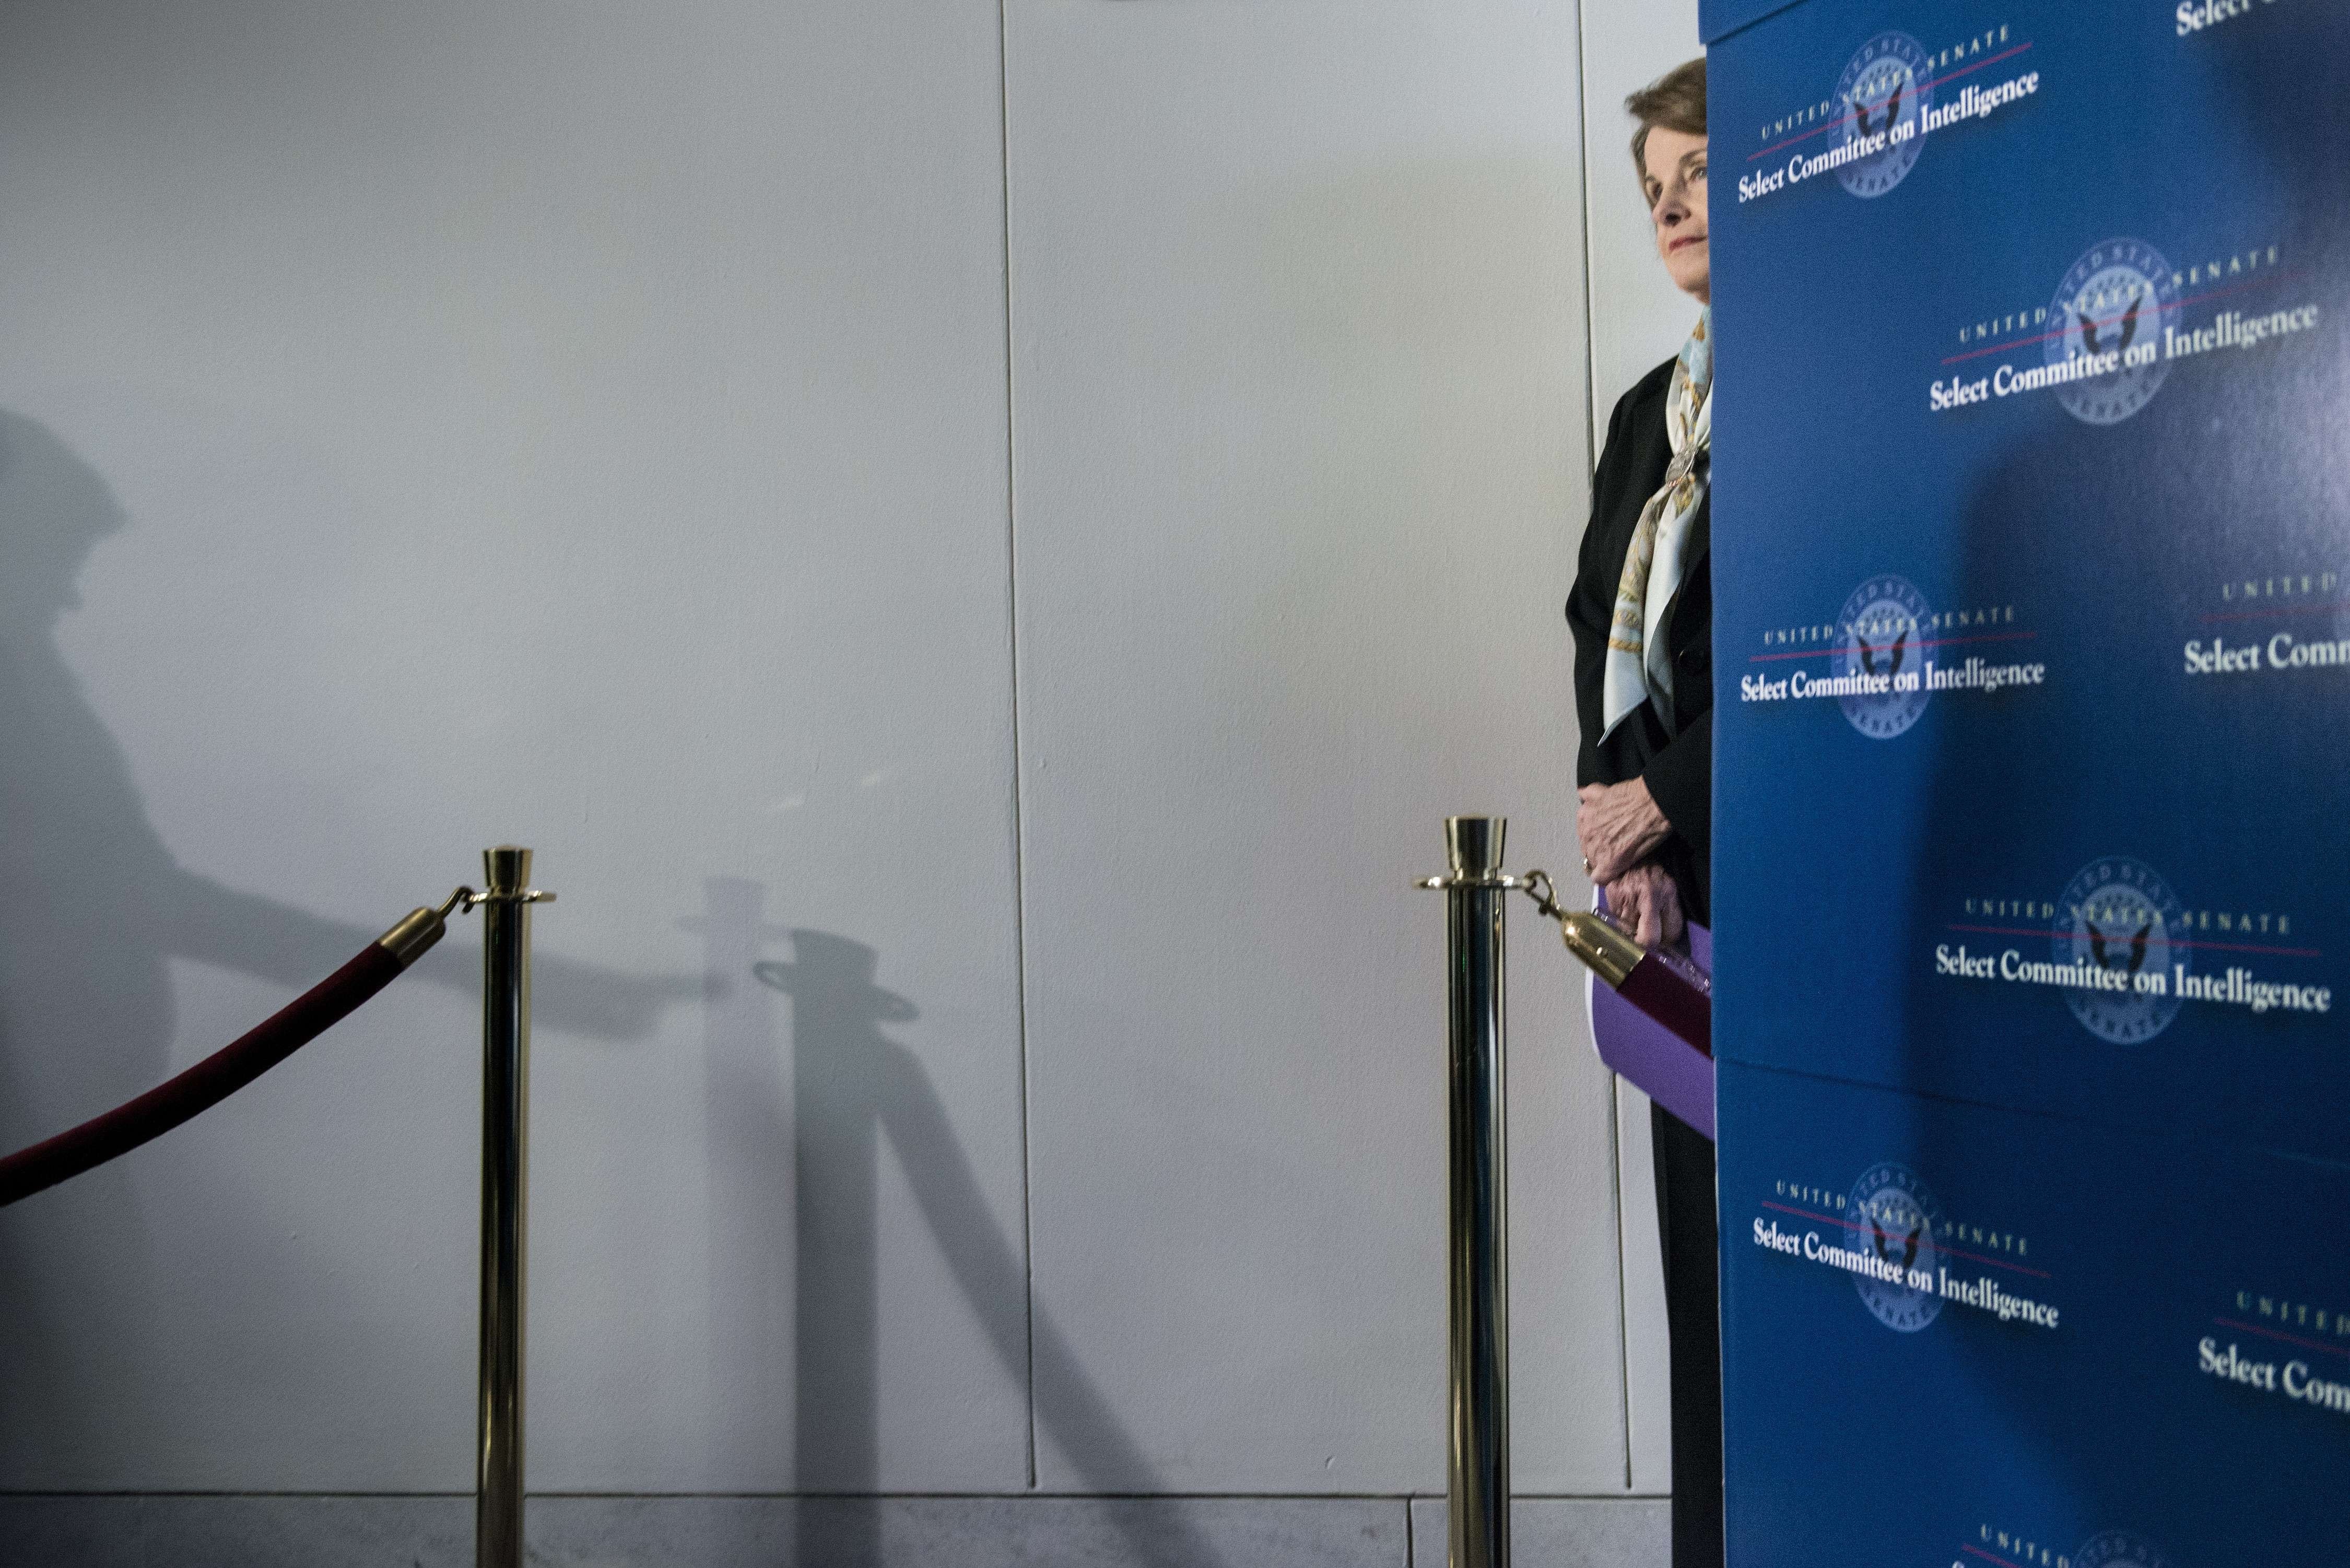 Senator Dianne Feinstein D-CA waits to speak to the media after a closed meeting of the Senate Intelligence Committee on Capitol Hill